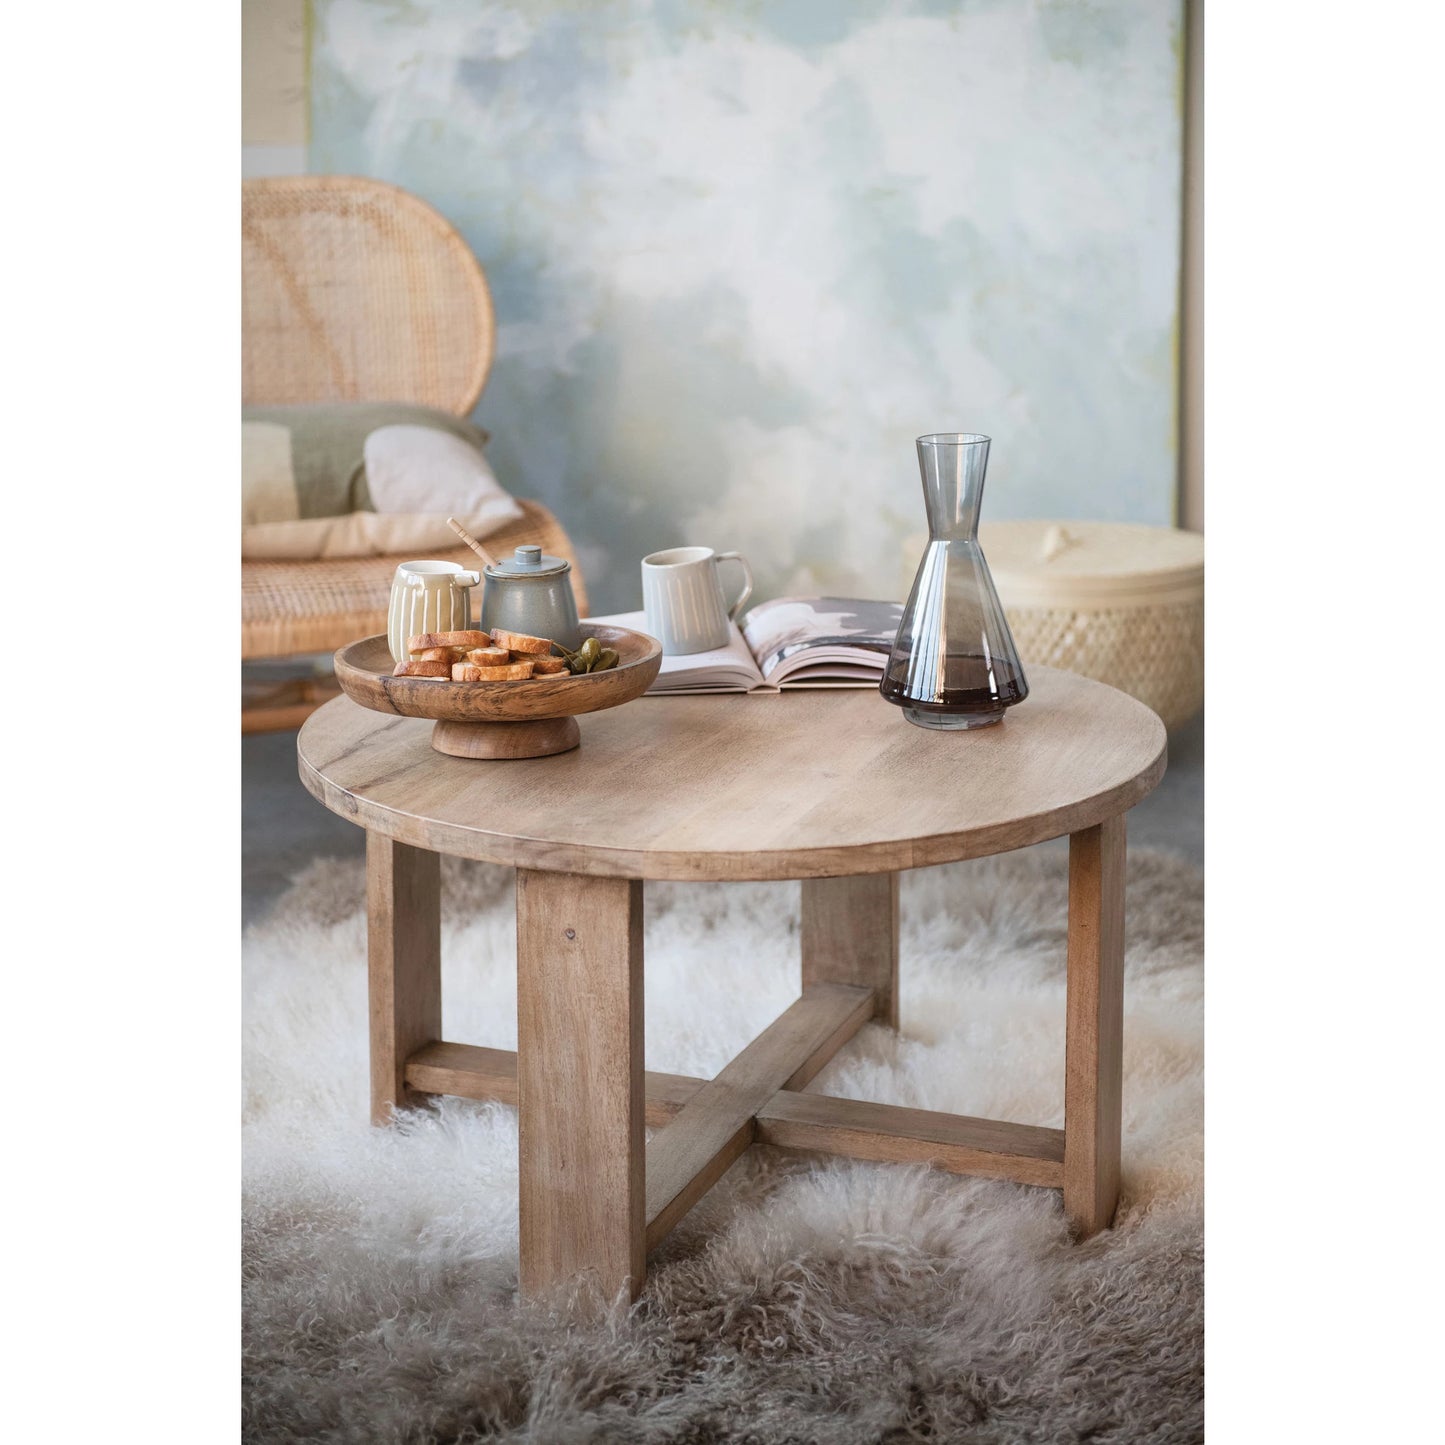 decanter set on a round coffee table with an open book, wooden bowl and mugs, table is set on a faux fur rug.